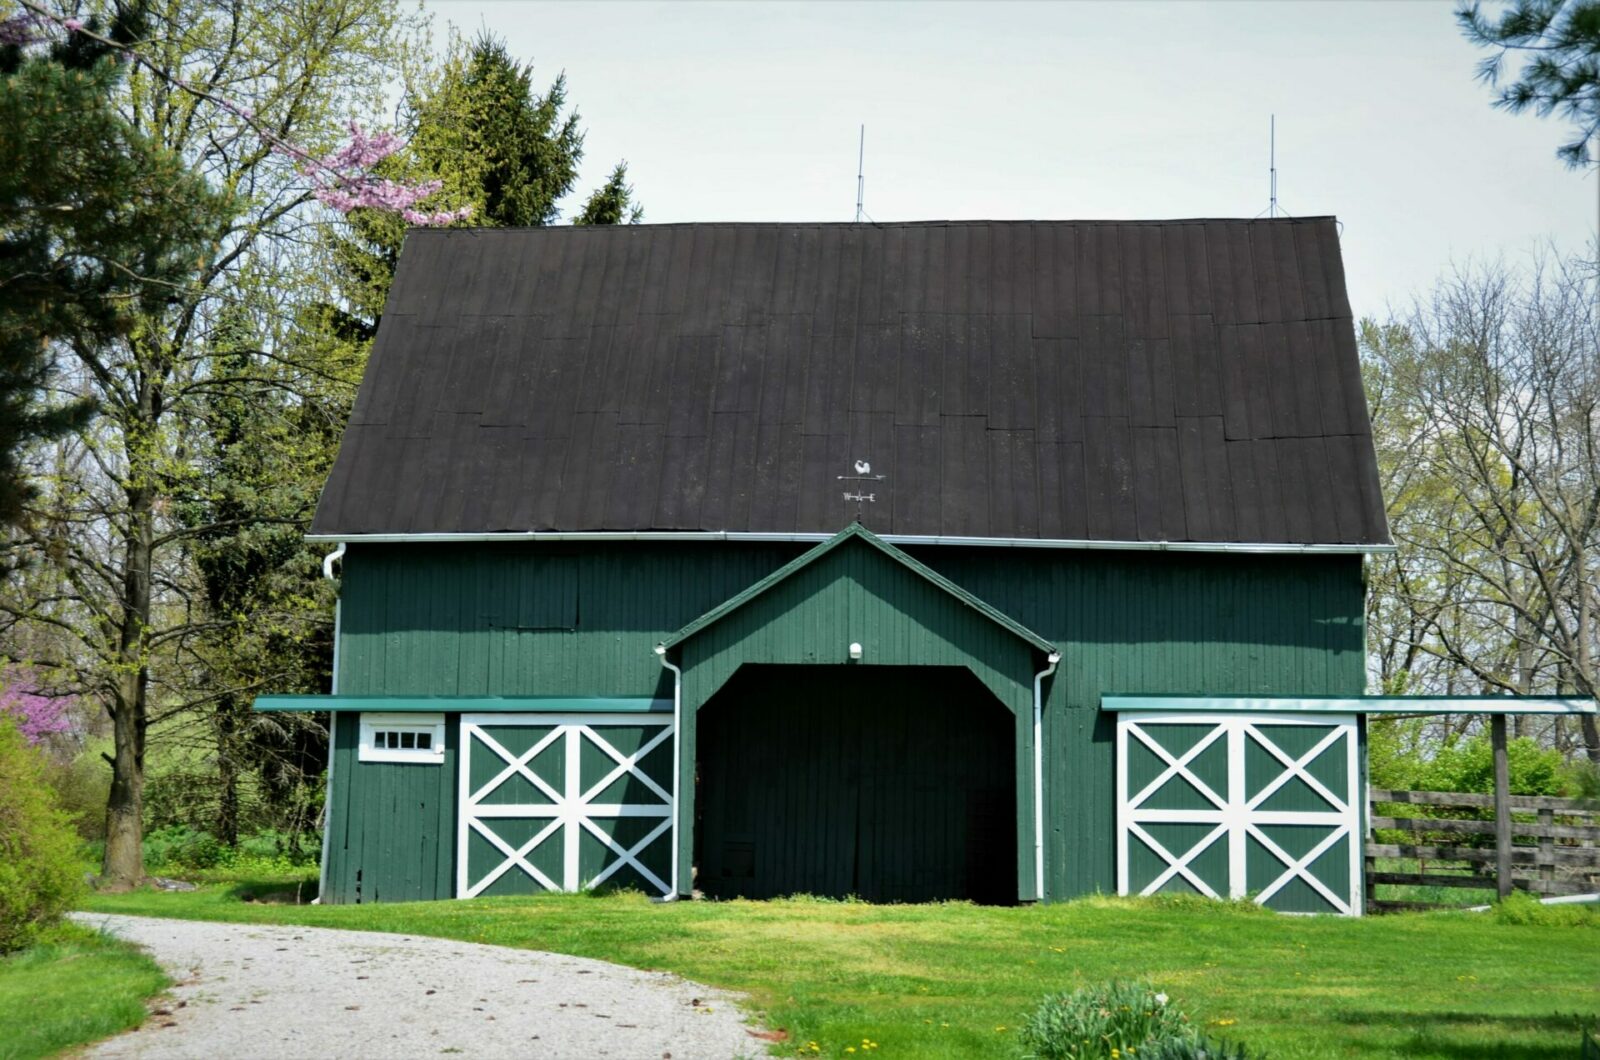 A traditional small horse barn.